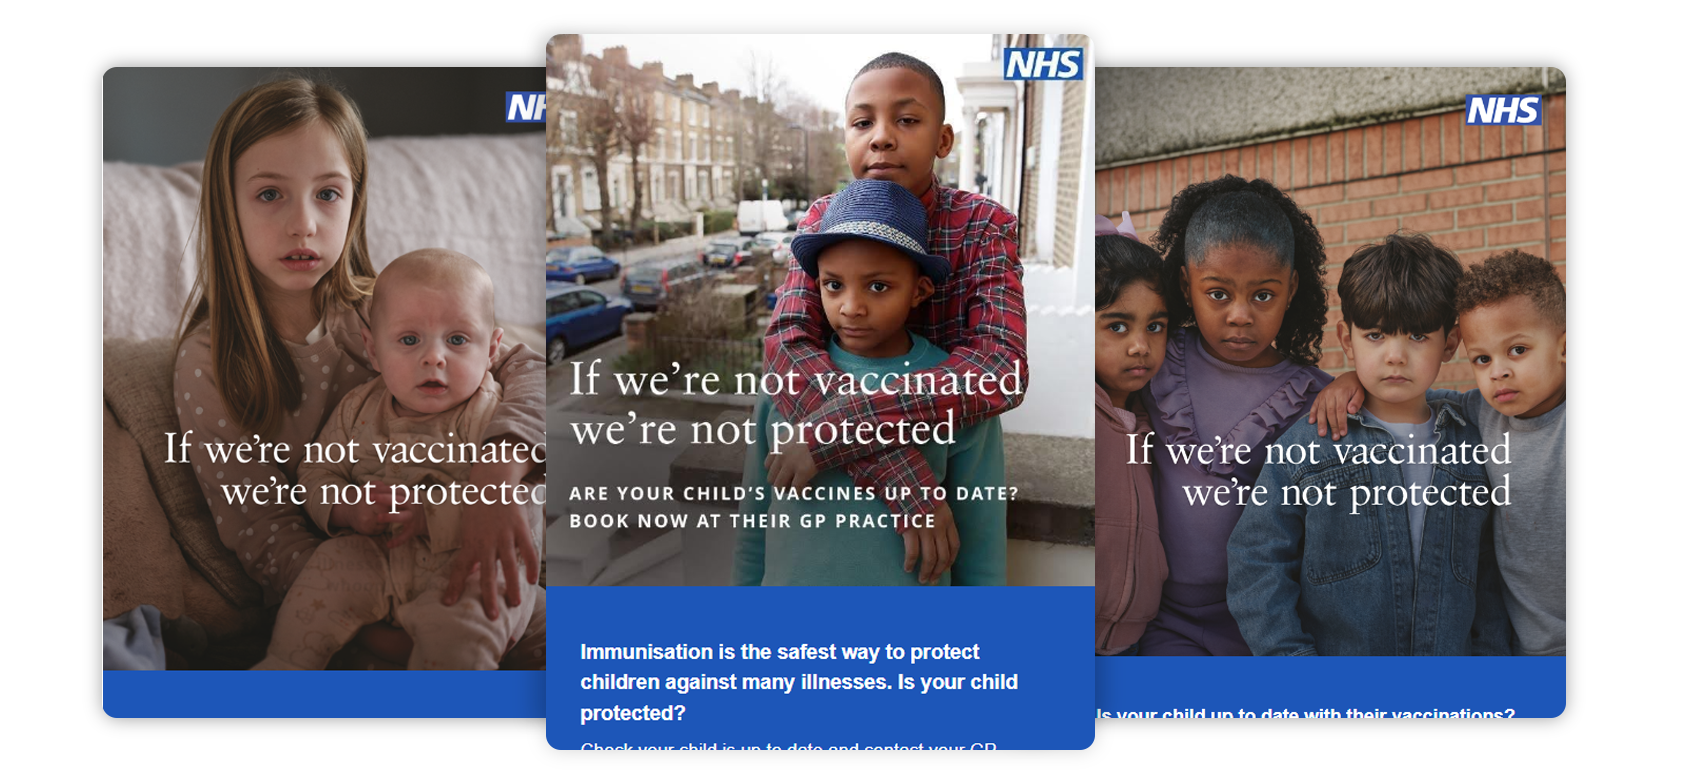 Email Library Campaign: Child immunisation